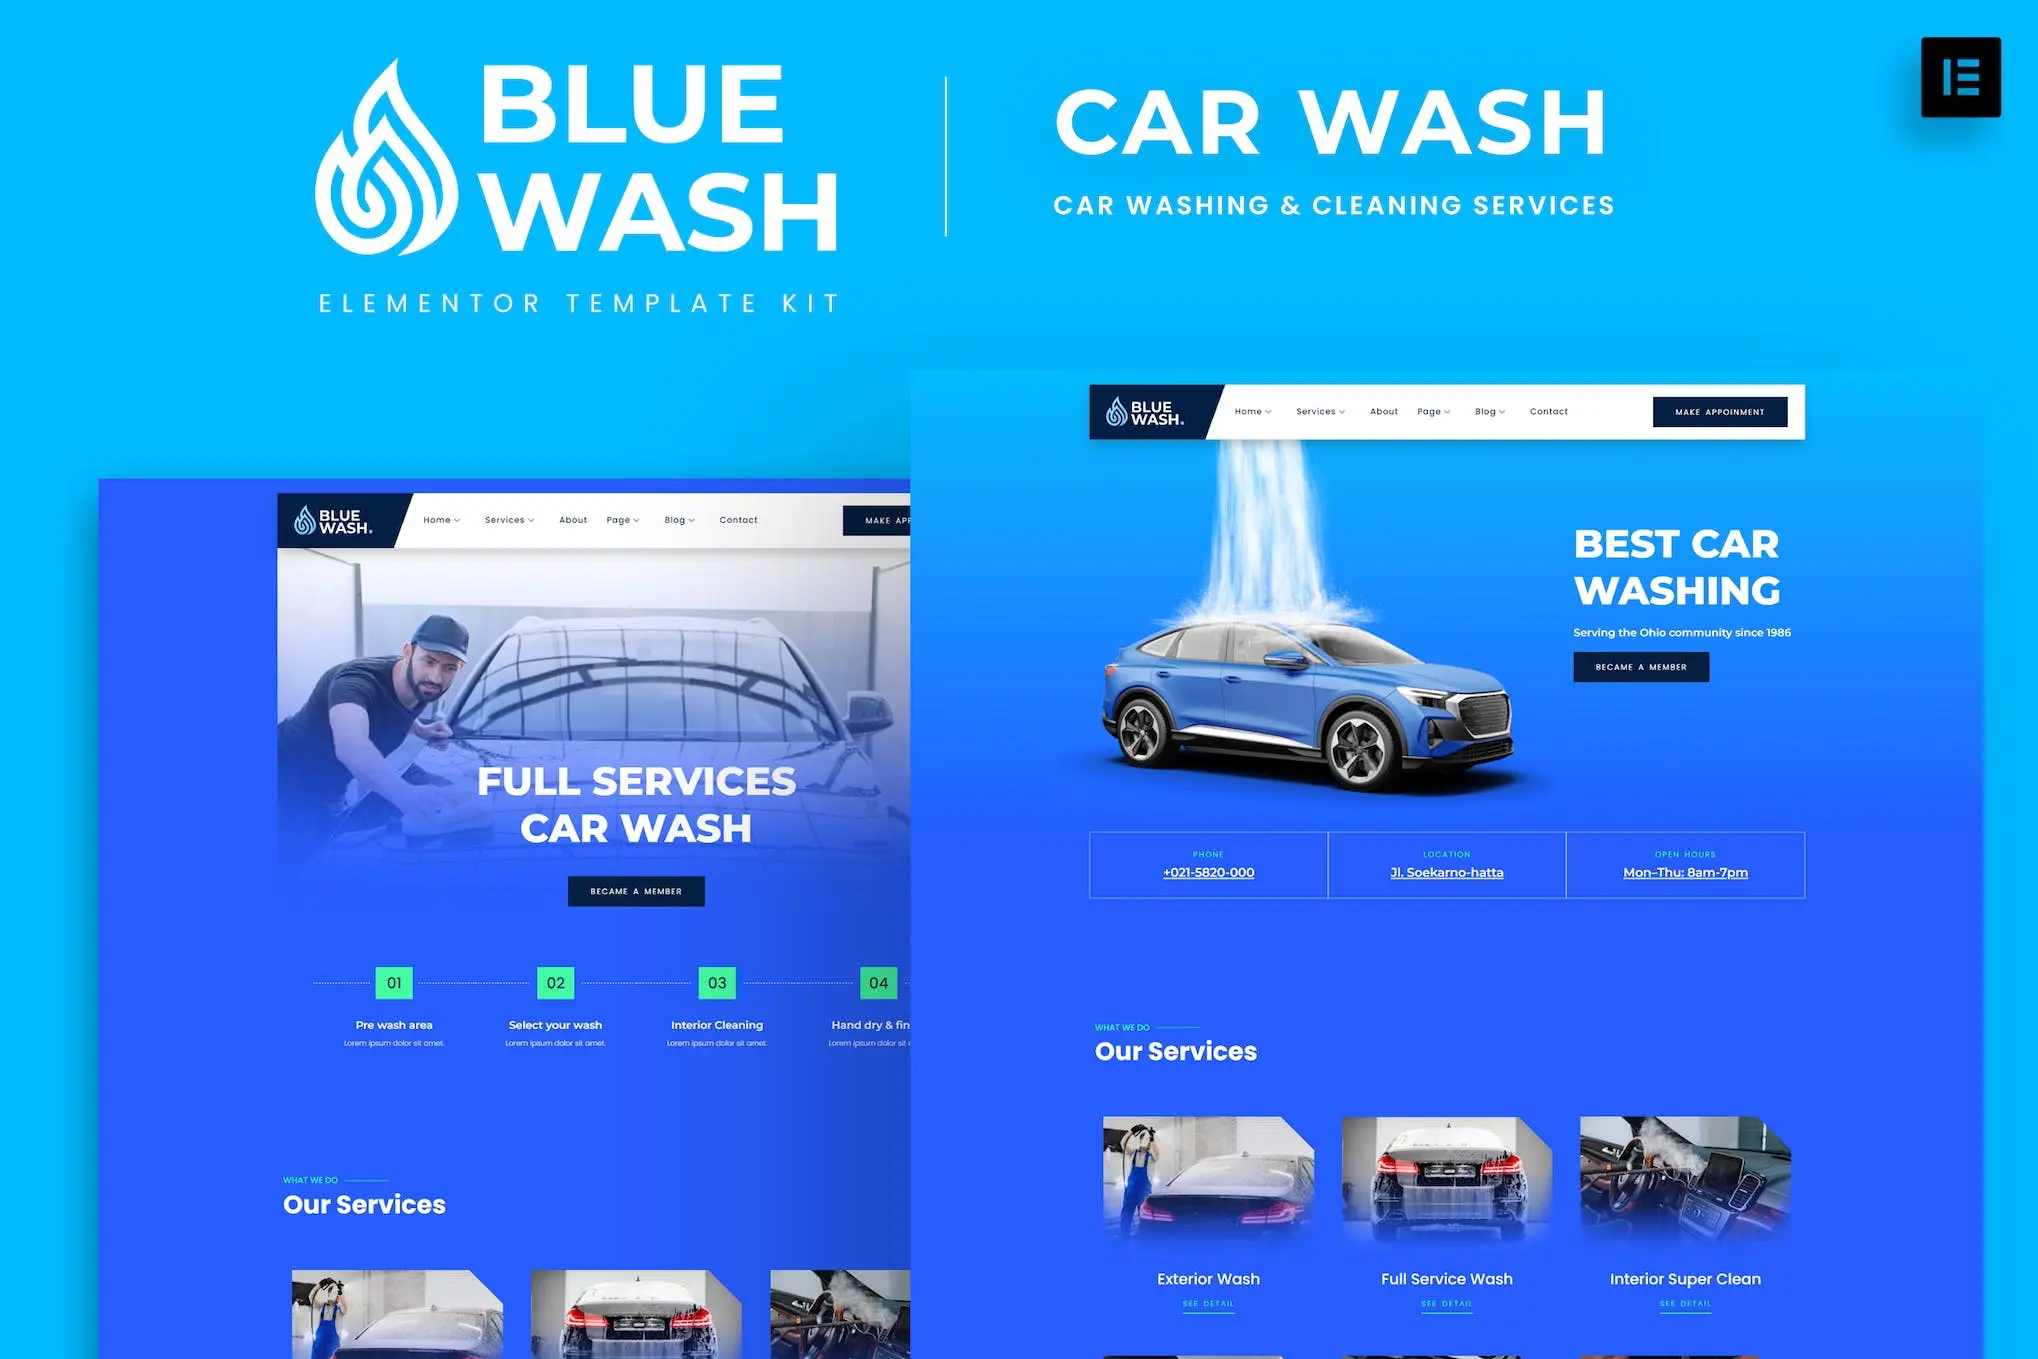 Download the Bluewash template kit for Elementor